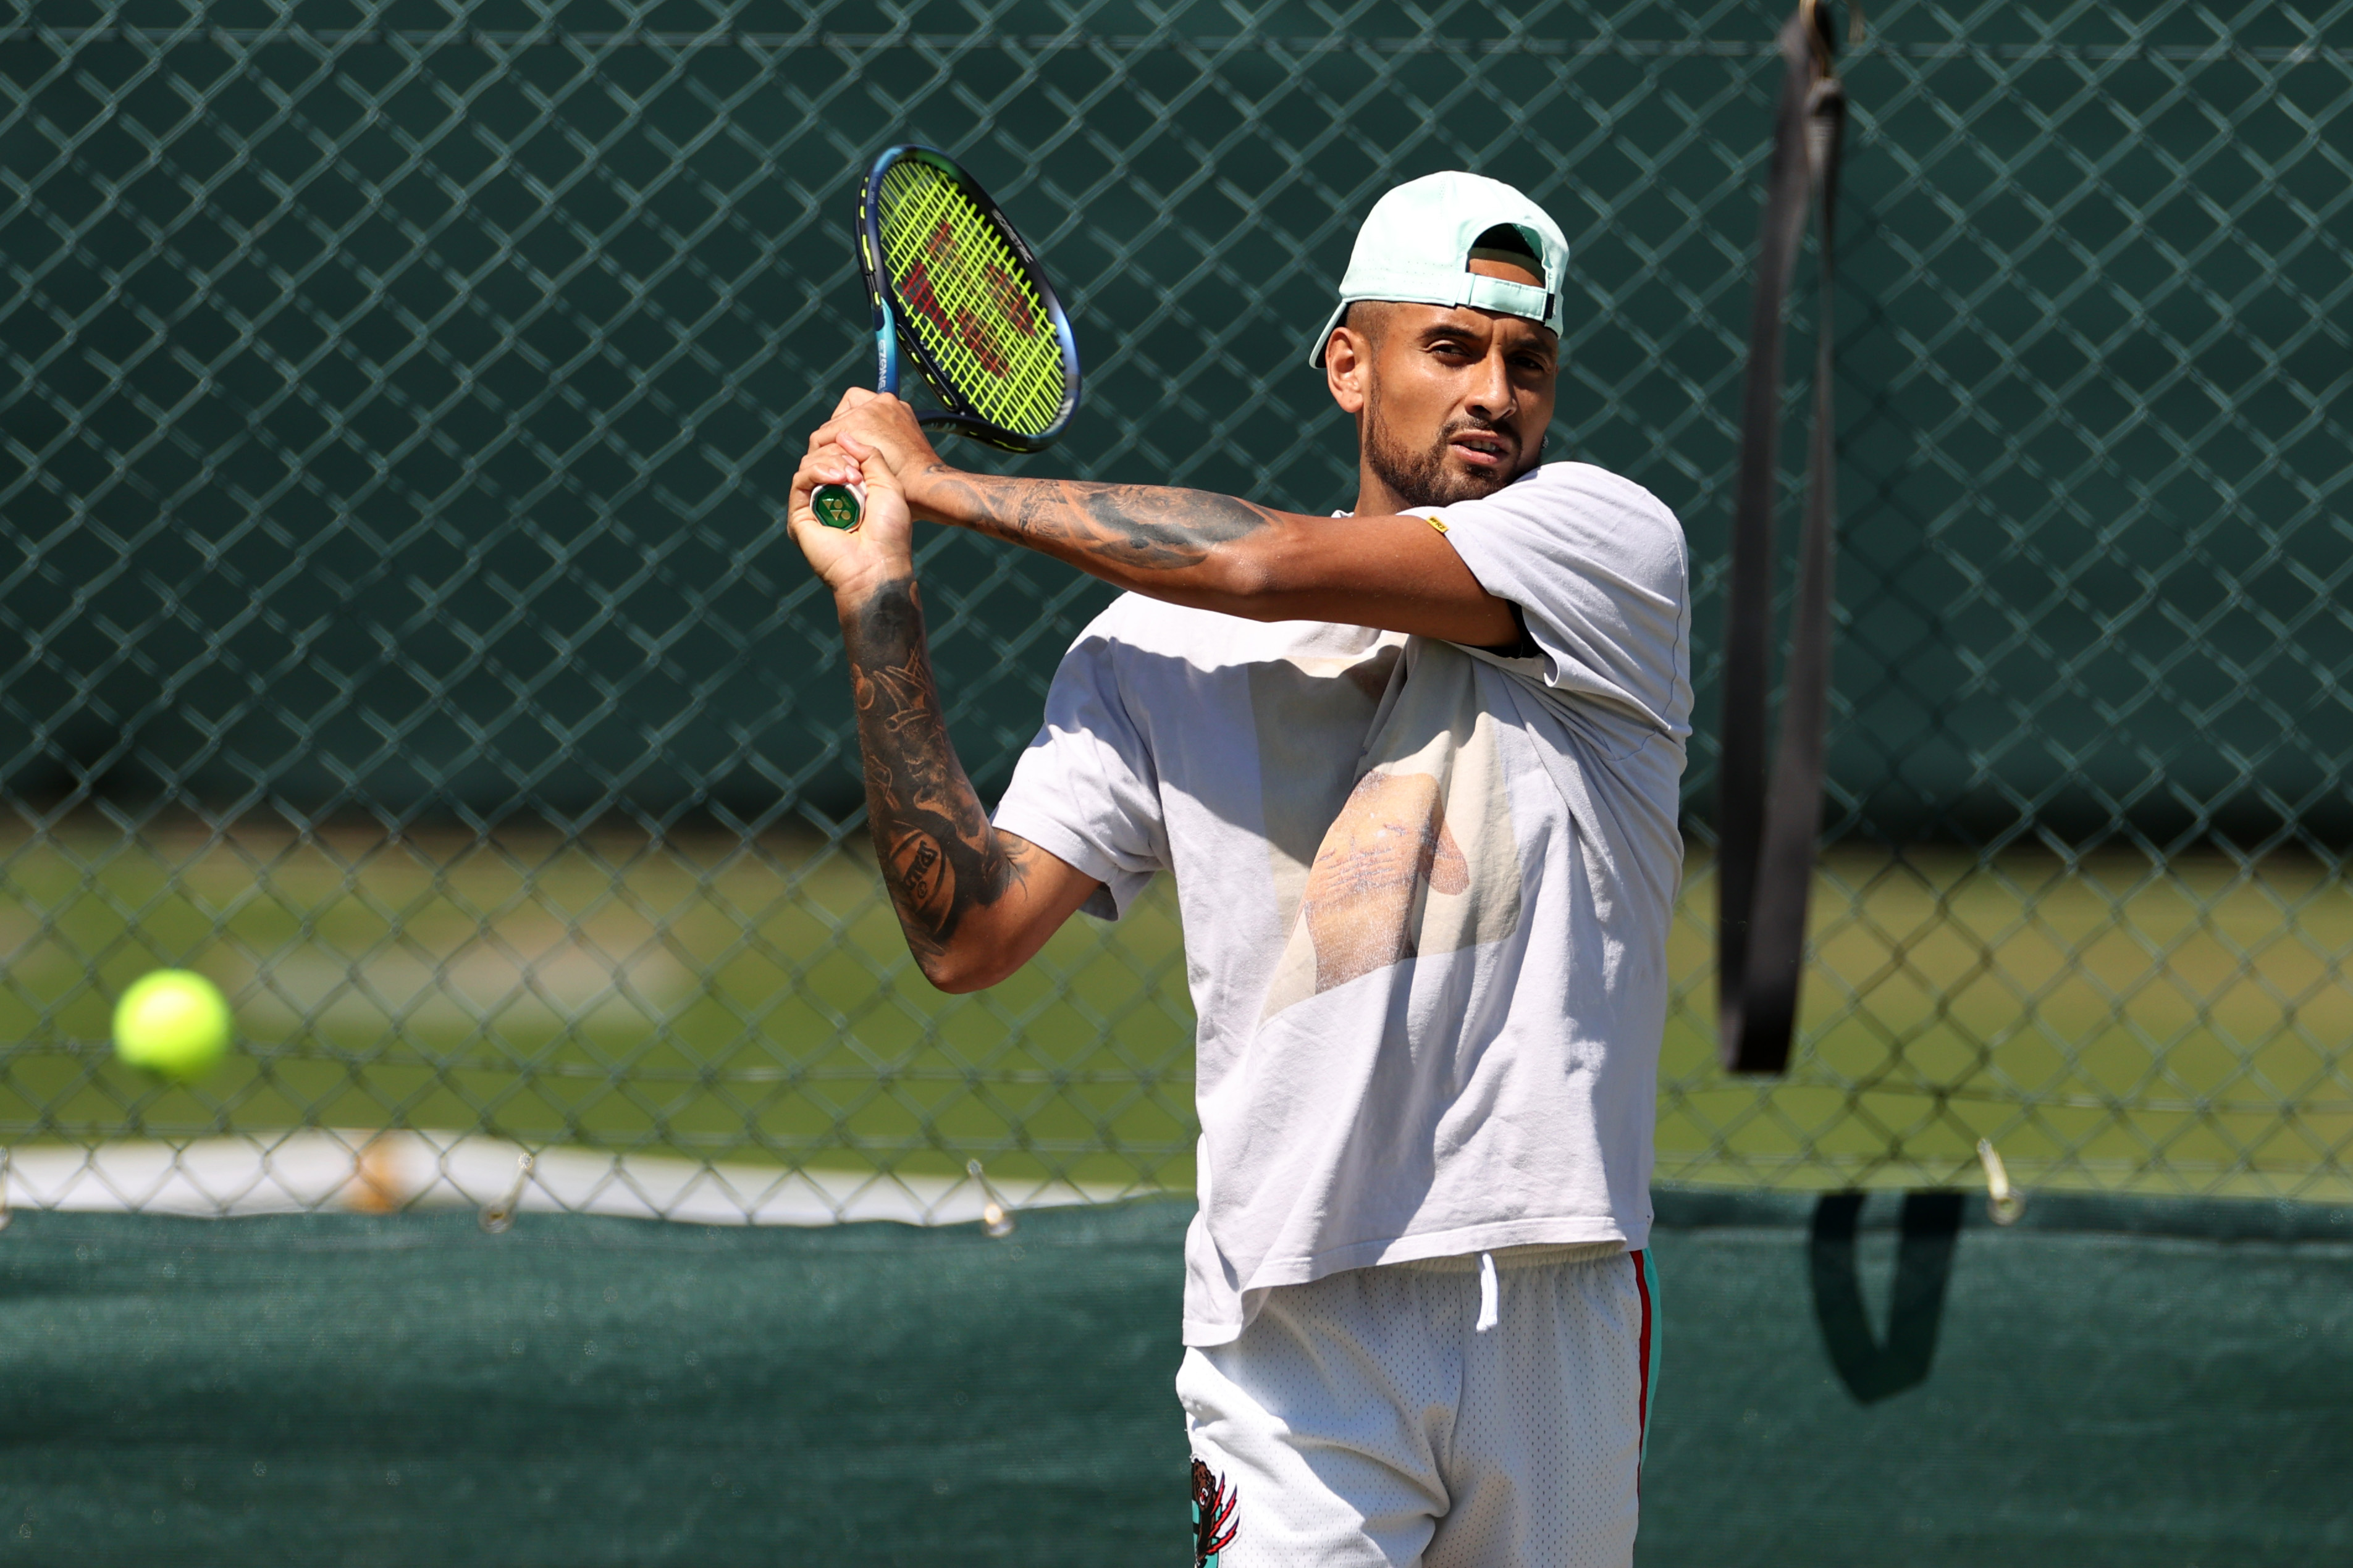 Nick Kyrgios of Australia during a practice session on day thirteen of The Championships Wimbledon 2022 at All England Lawn Tennis and Croquet Club on July 09, 2022 in London, England.